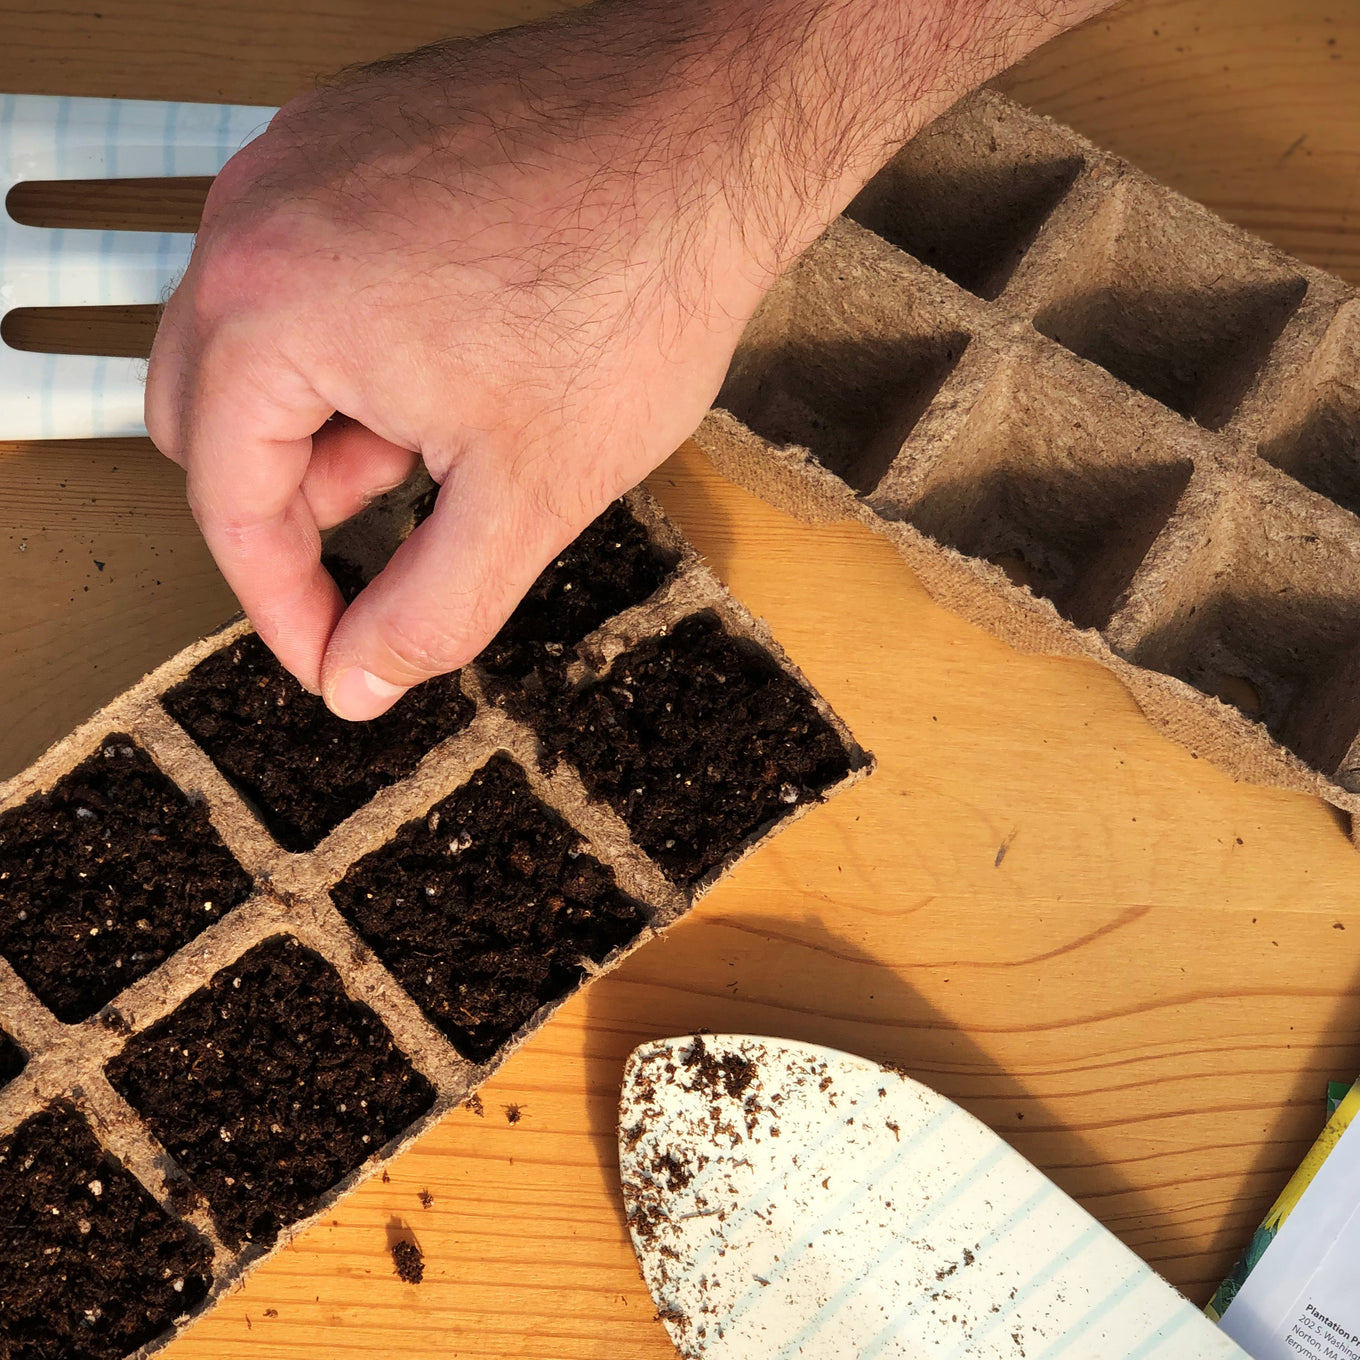 Start your Organic Roma Tomato seeds in biodegradable Jiffy peat strips for easy transplanting when seedlings are ready.